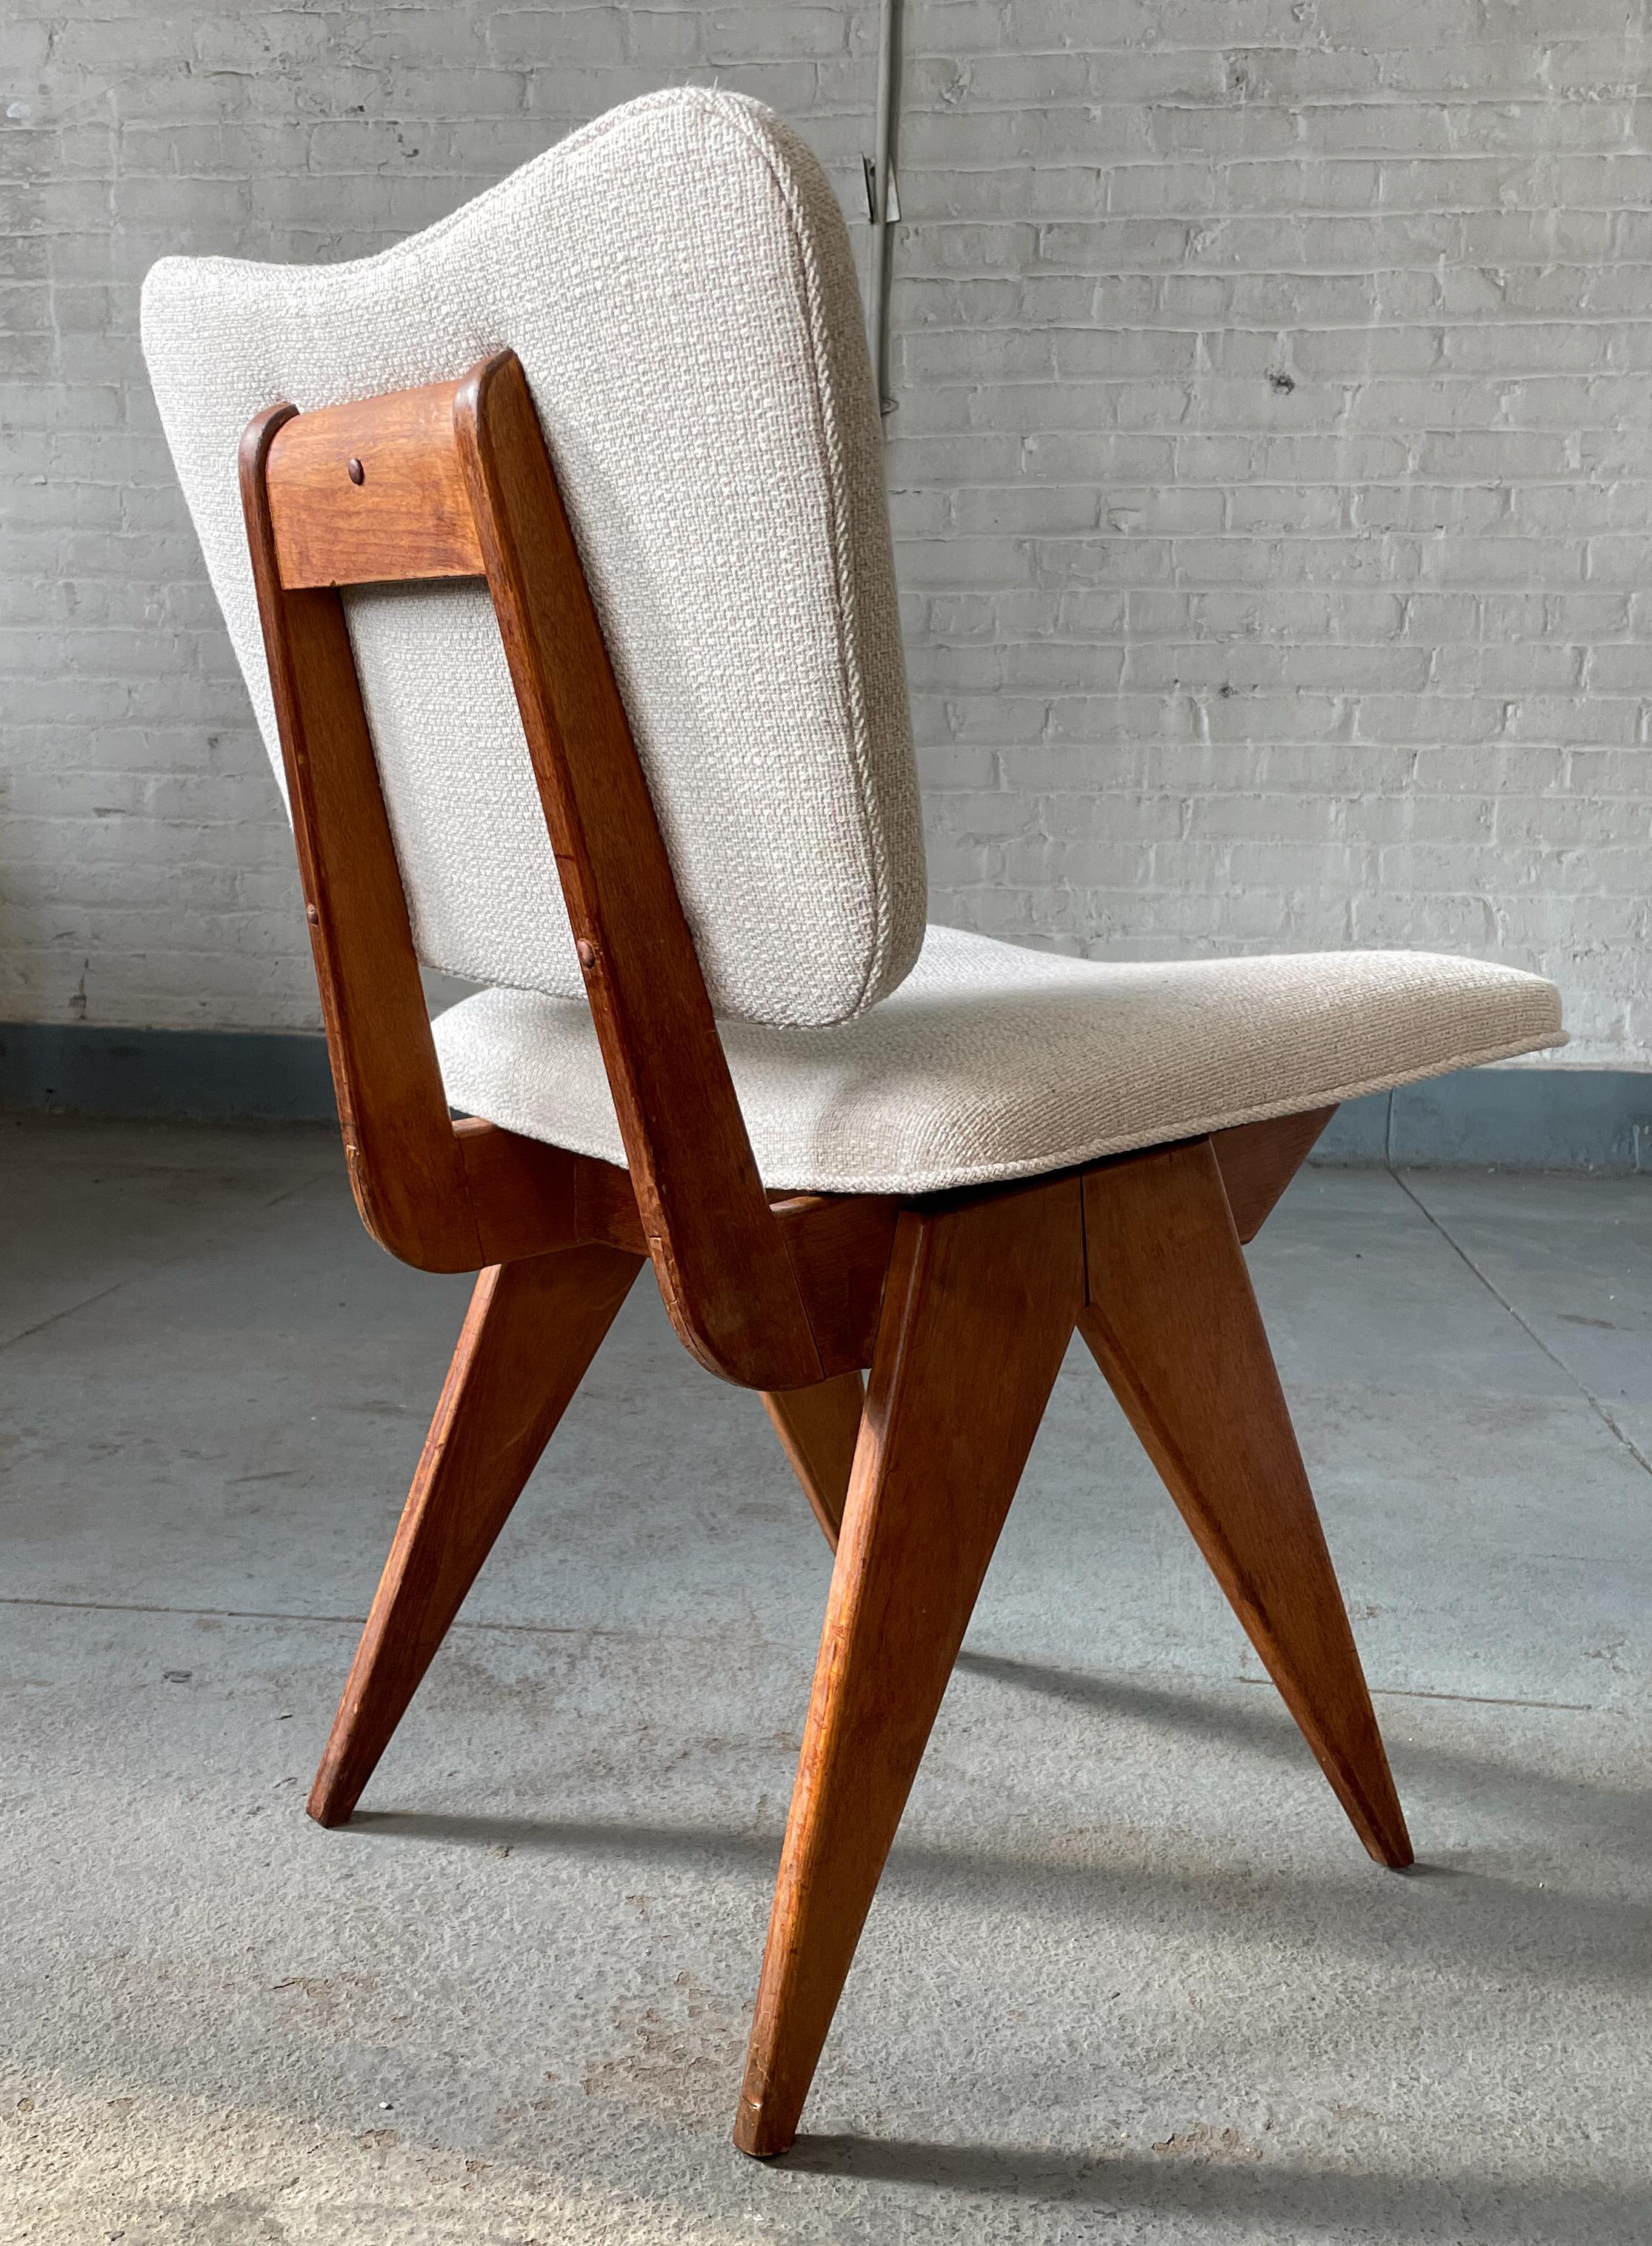 Mid-20th Century Pair of Early Jens Risom Chairs for His Own Company